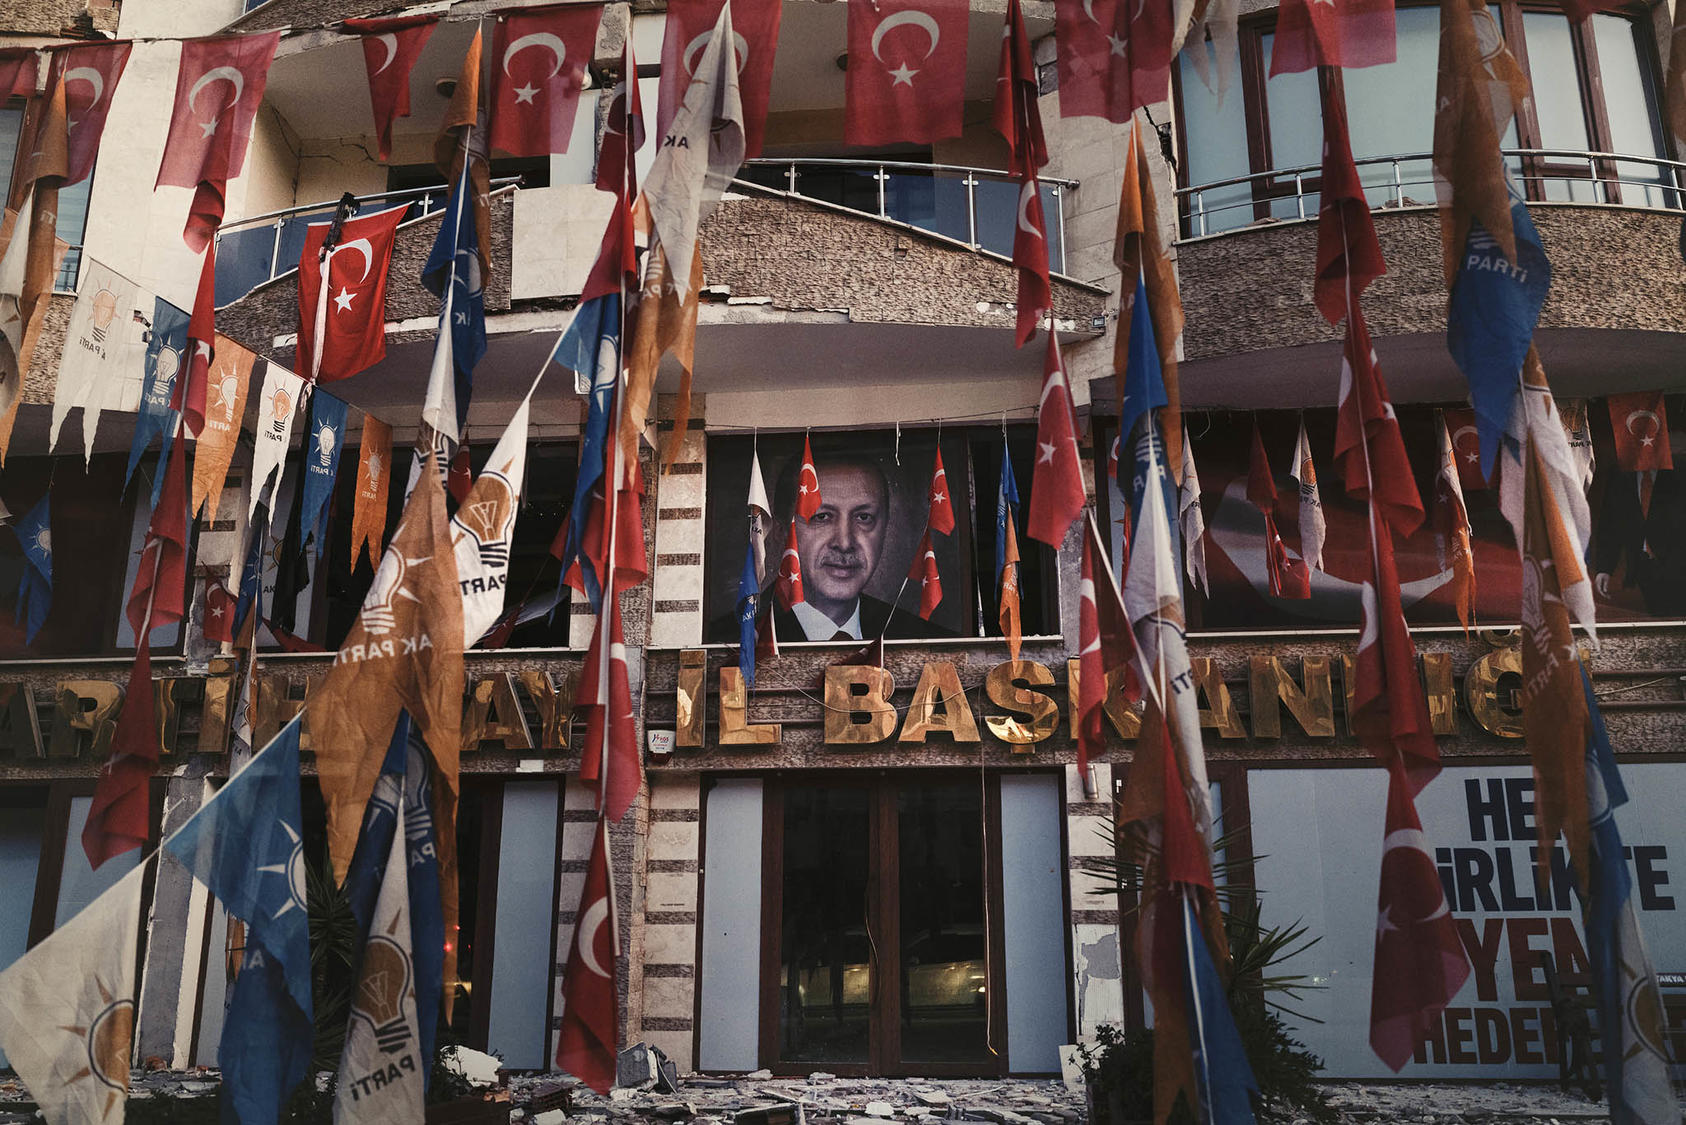 An office of President Recep Tayyip Erdogan’s political party displays flags and his photo ahead of Turkey’s coming election. The vote and recent earthquake weigh amid talks with Turkey on Sweden joining NATO. (Emily Garthwaite/The New York Times)